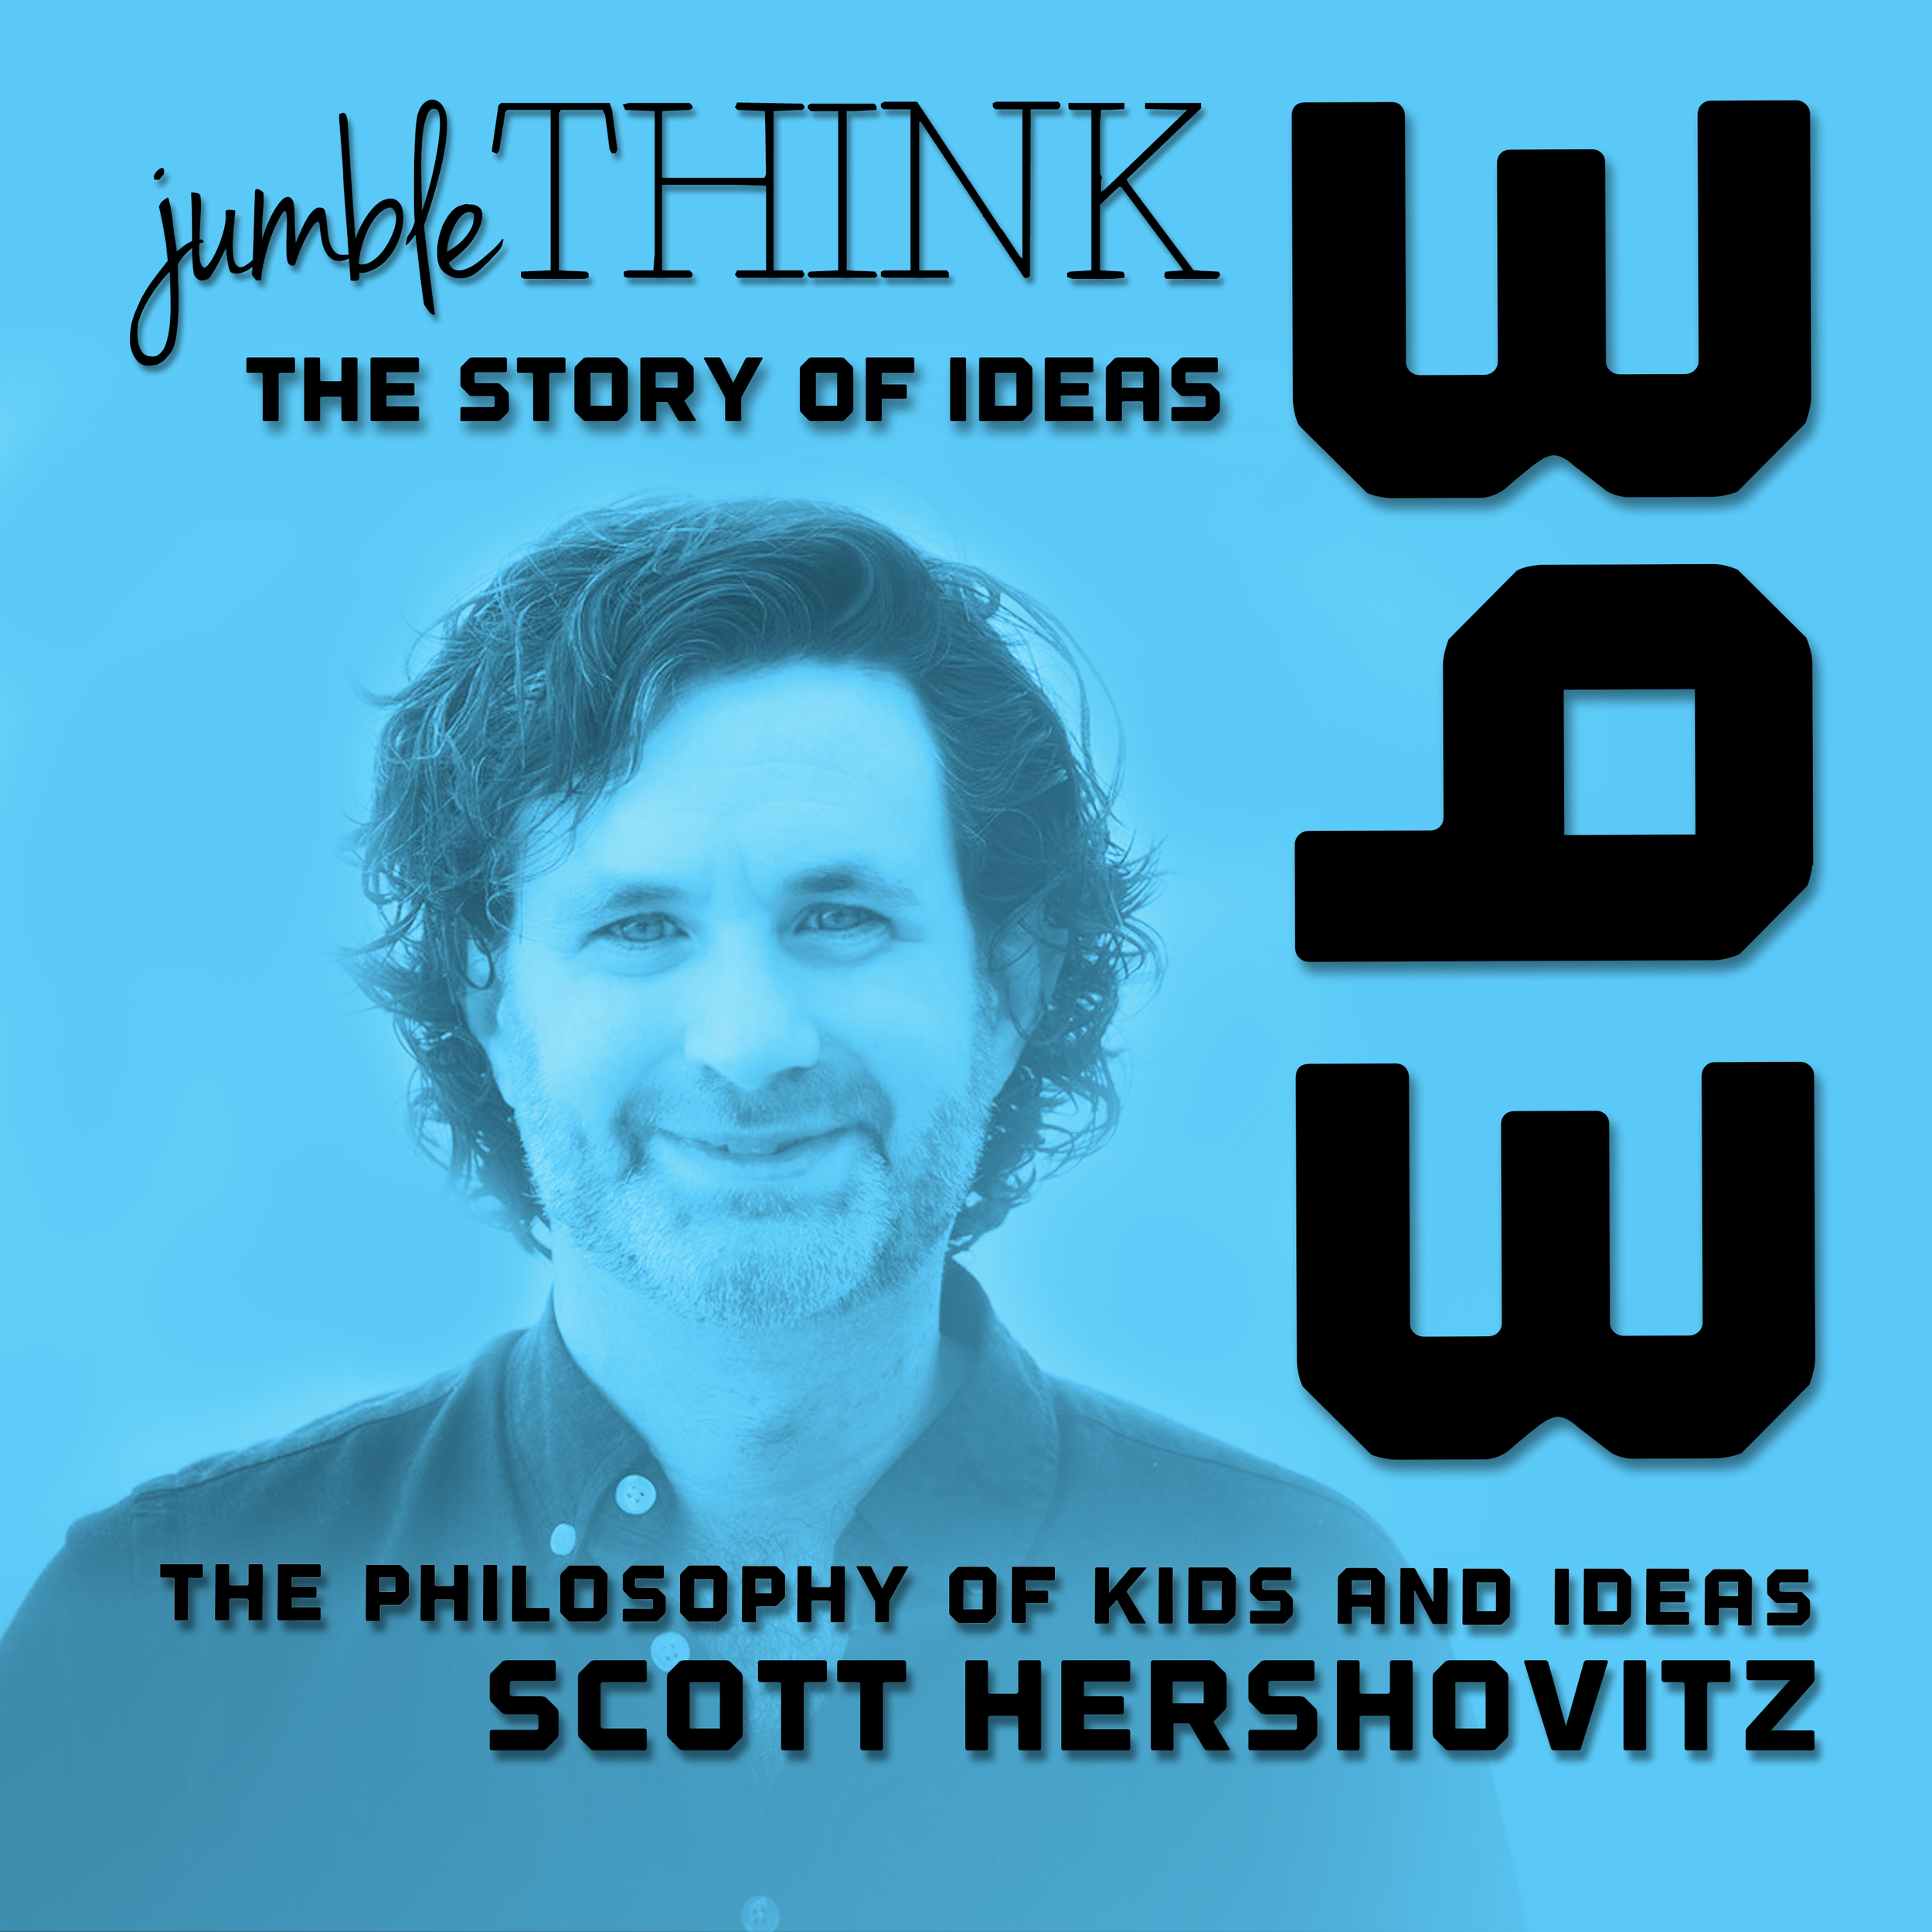 The Philosophy of Kids and Ideas